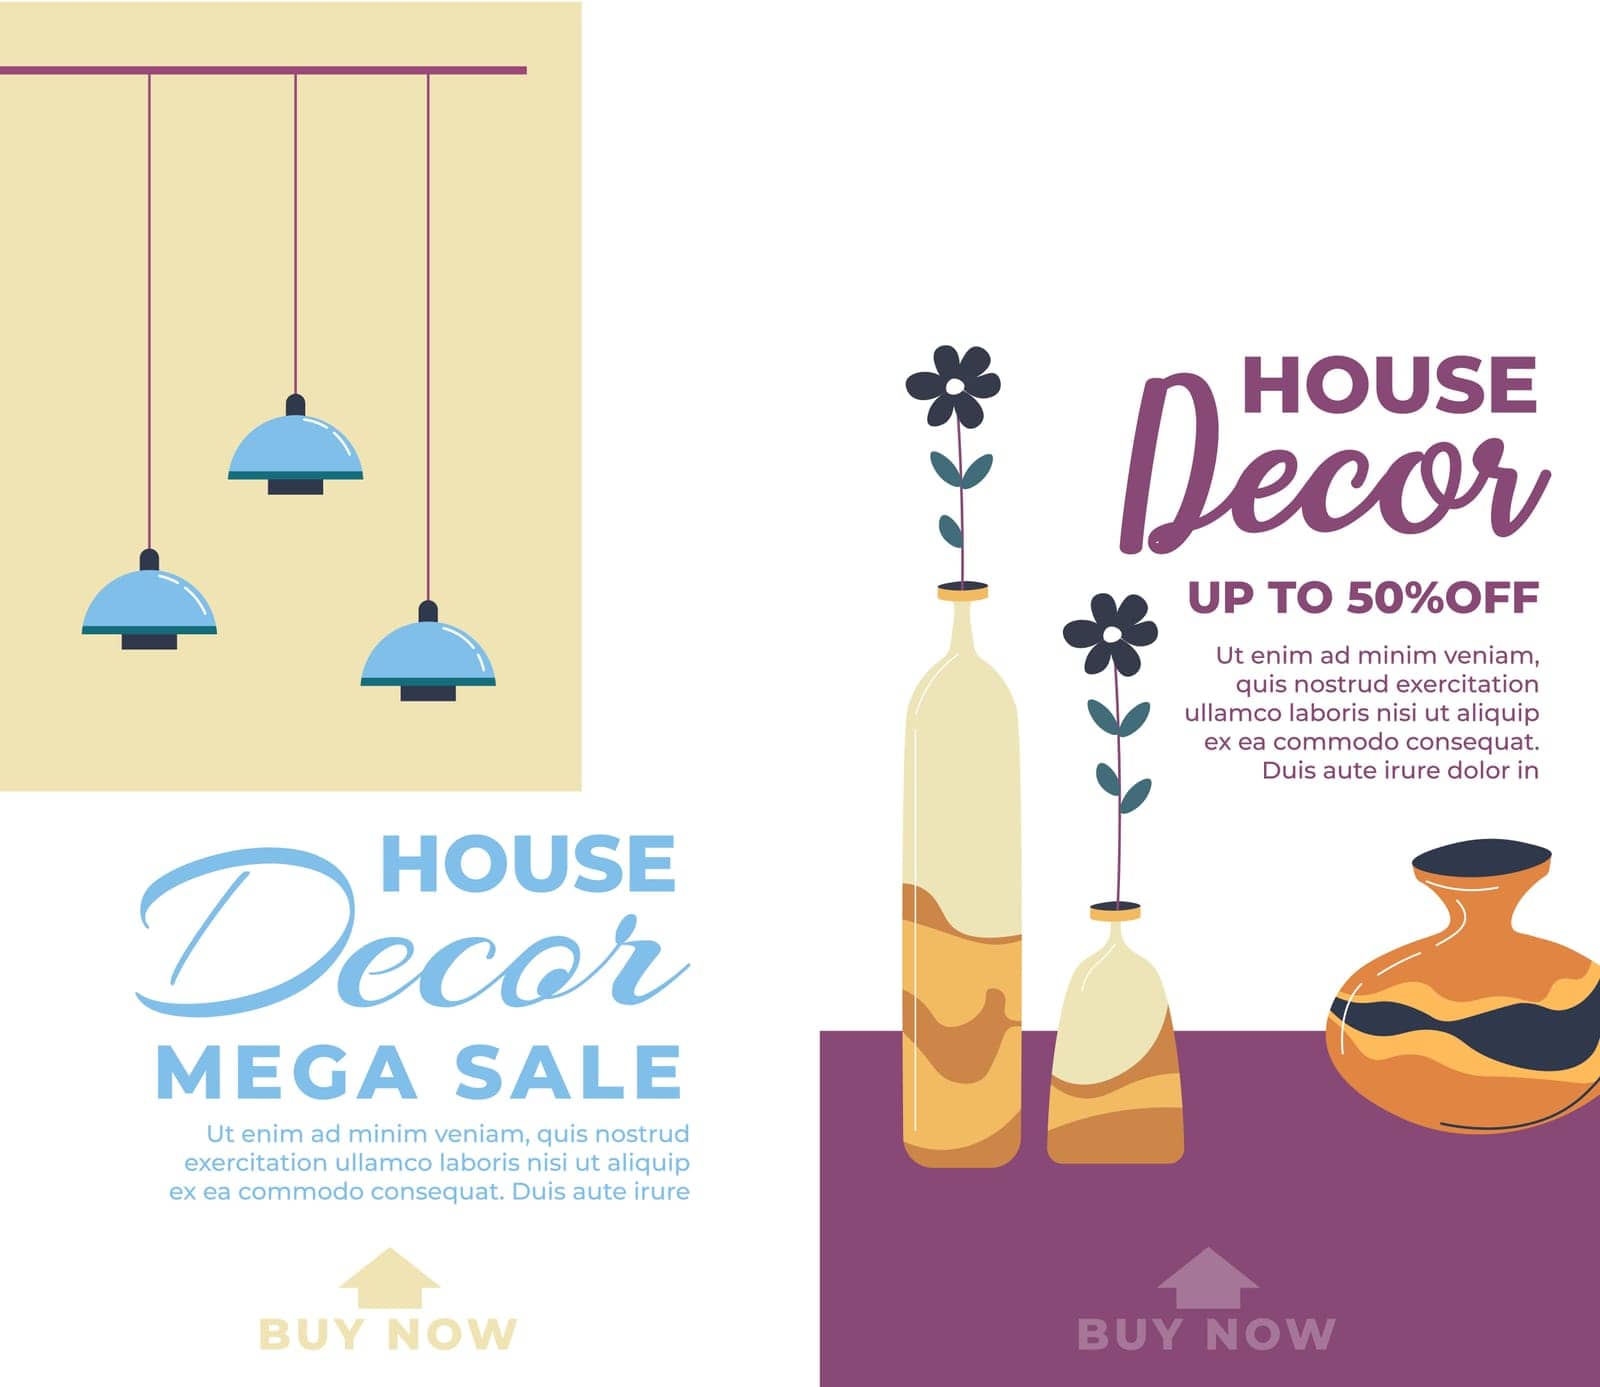 Shopping in stores, offers for customers. Mega sale for home decor, loyalty programs. Promotions and discounts, seasonal reduction to attract clients. Website page. Vector in flat style illustration